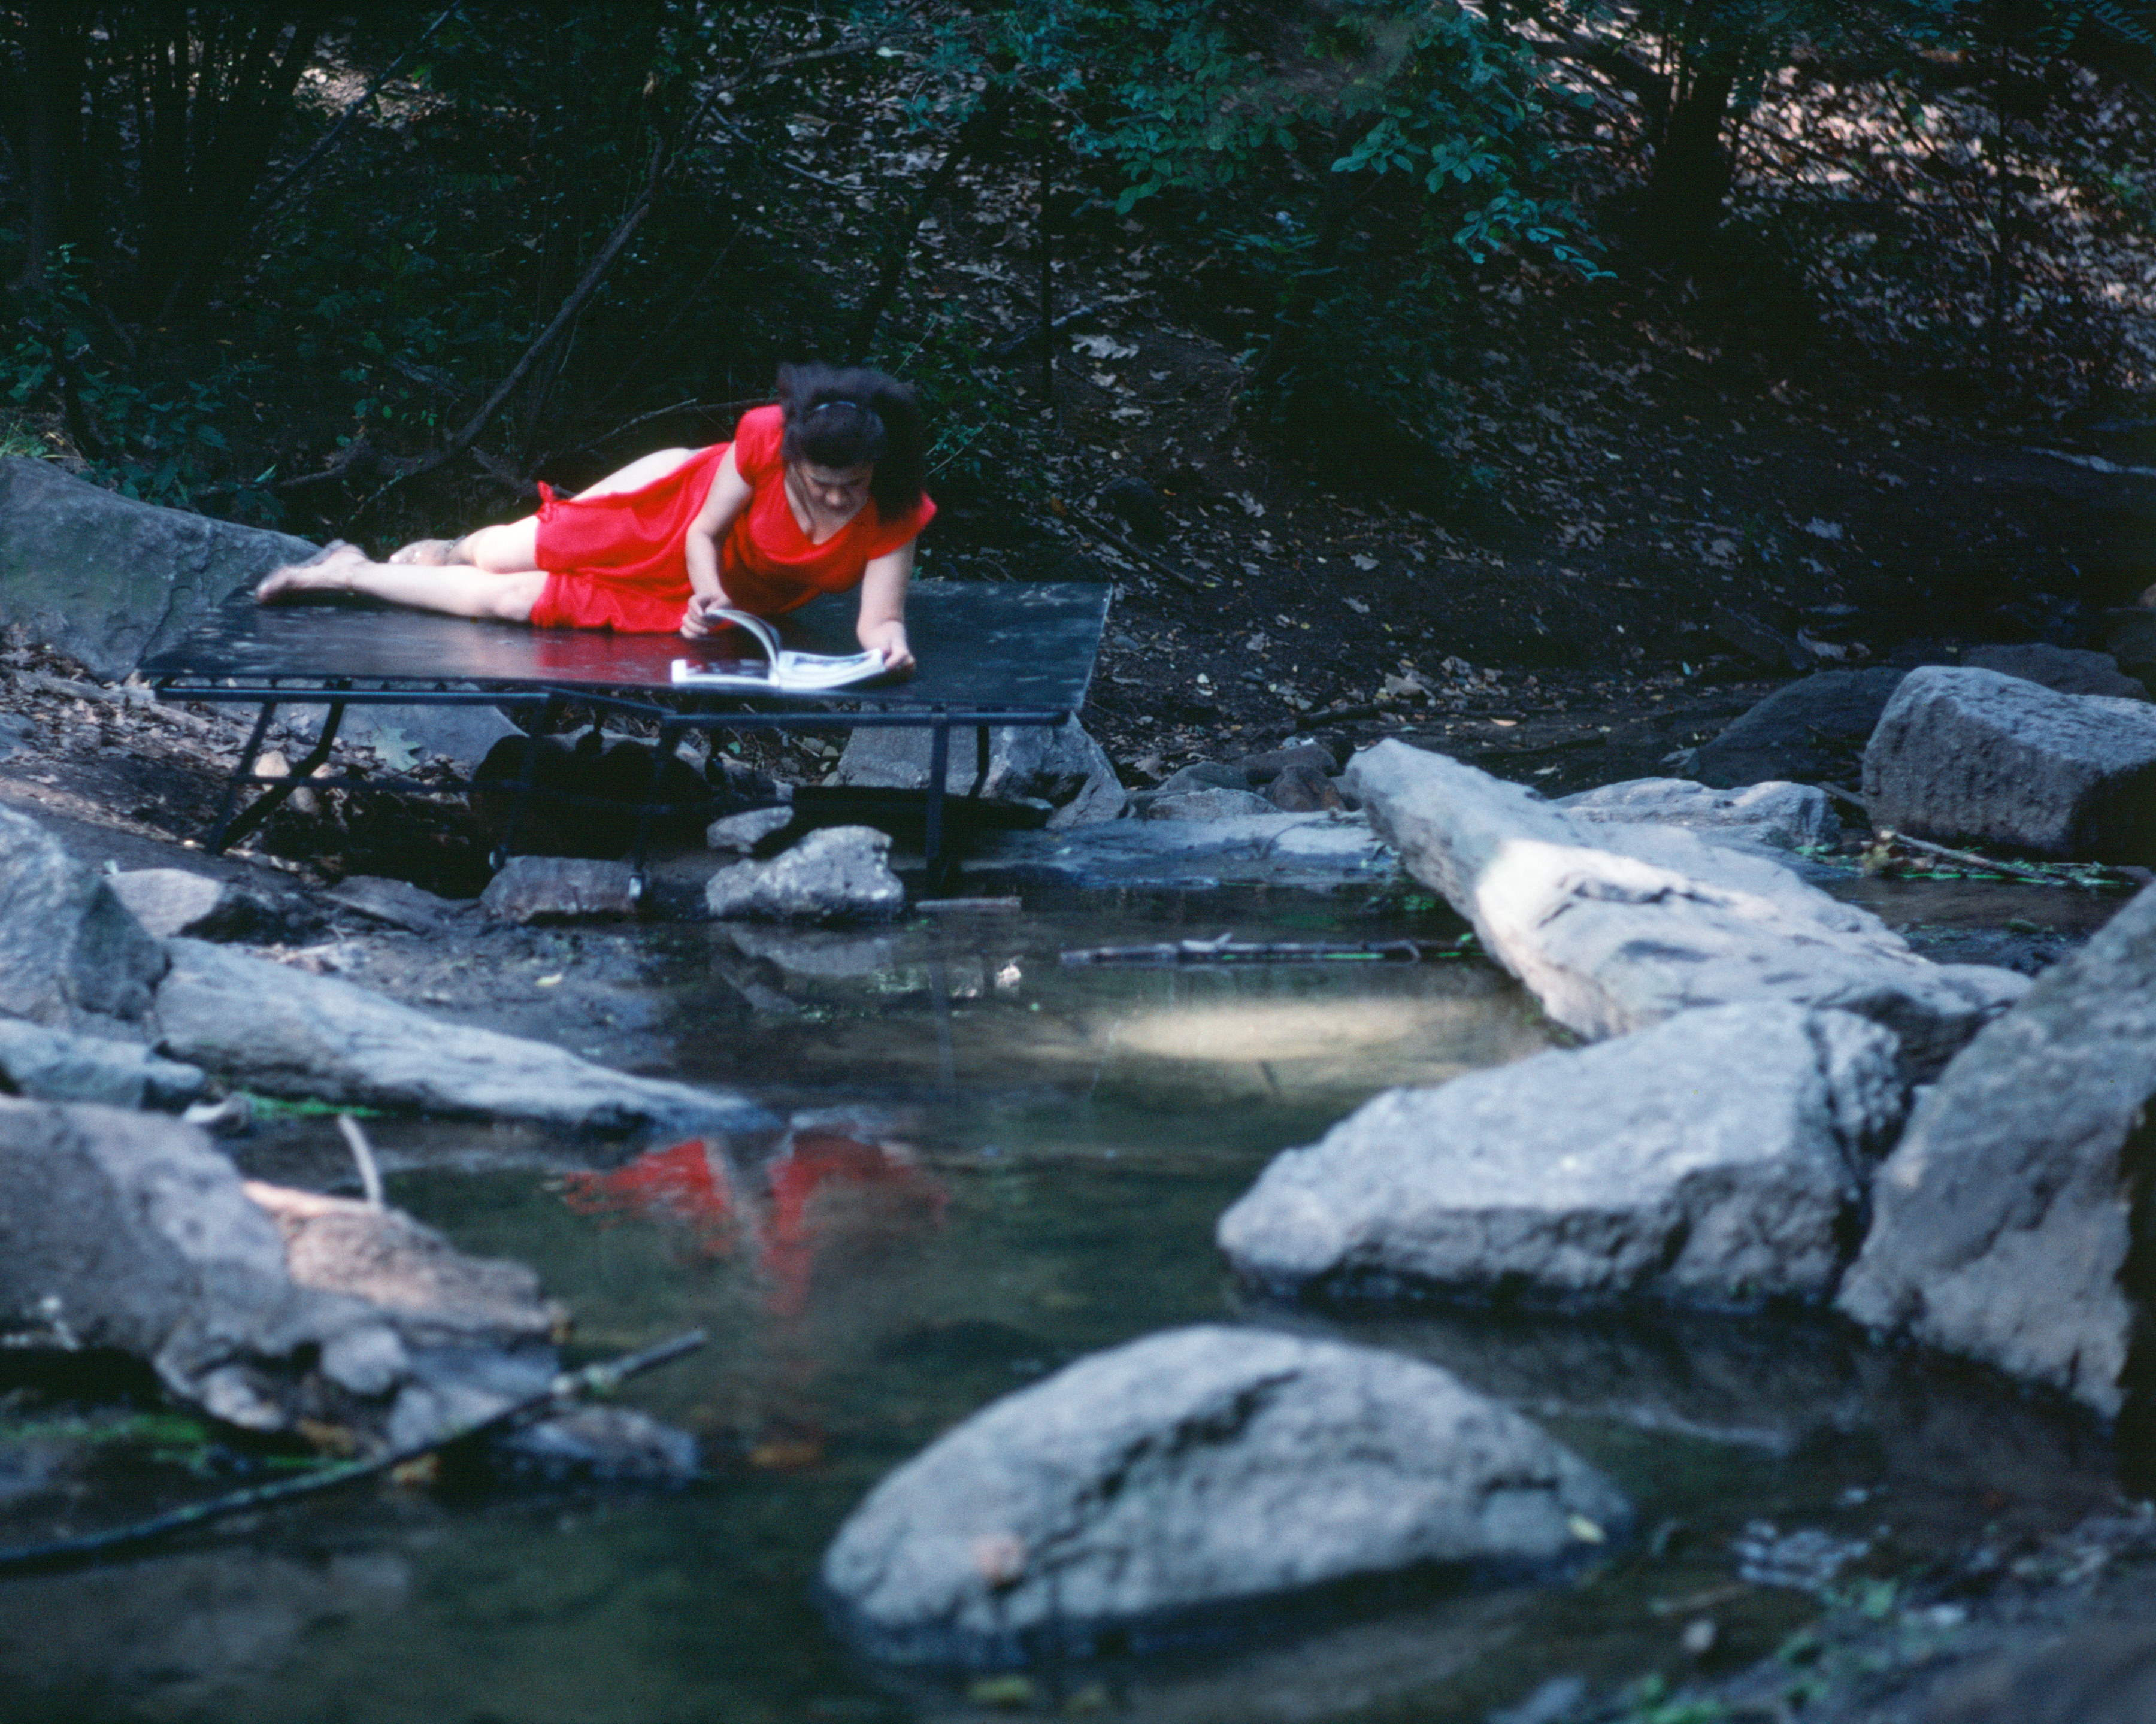 Rivers, First Draft: The Woman in Red, on a bed jutting into the water, skims an accordion-folded album of photos, 1982/2015, Digital C-print from Kodachrome 35mm slides in 48 parts, 16h x 20w in (40.64h x 50.80w cm)